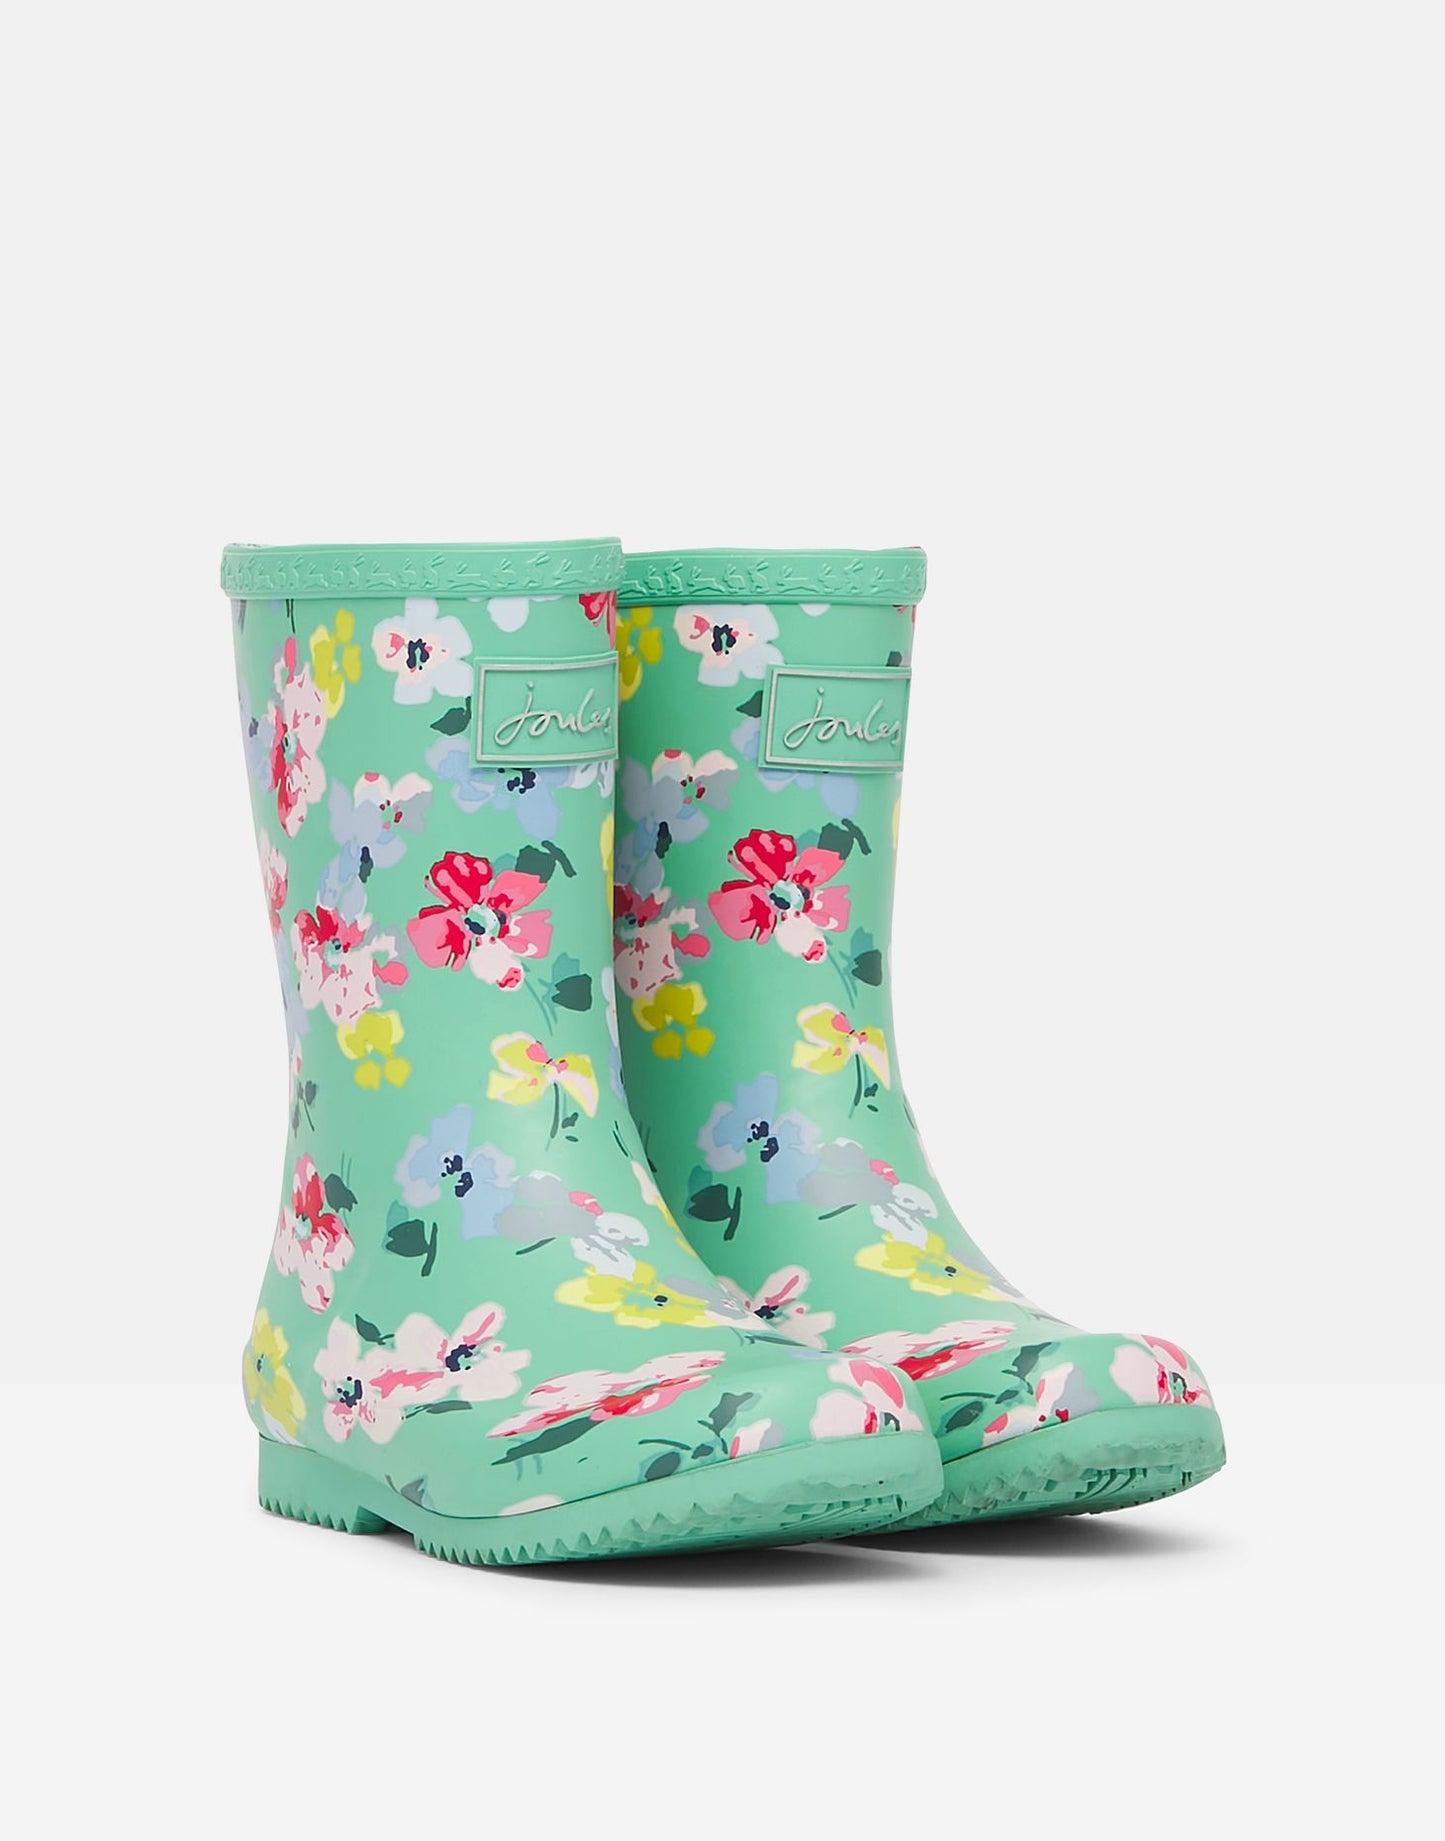 Joules Green Floral Roll Up Wellies